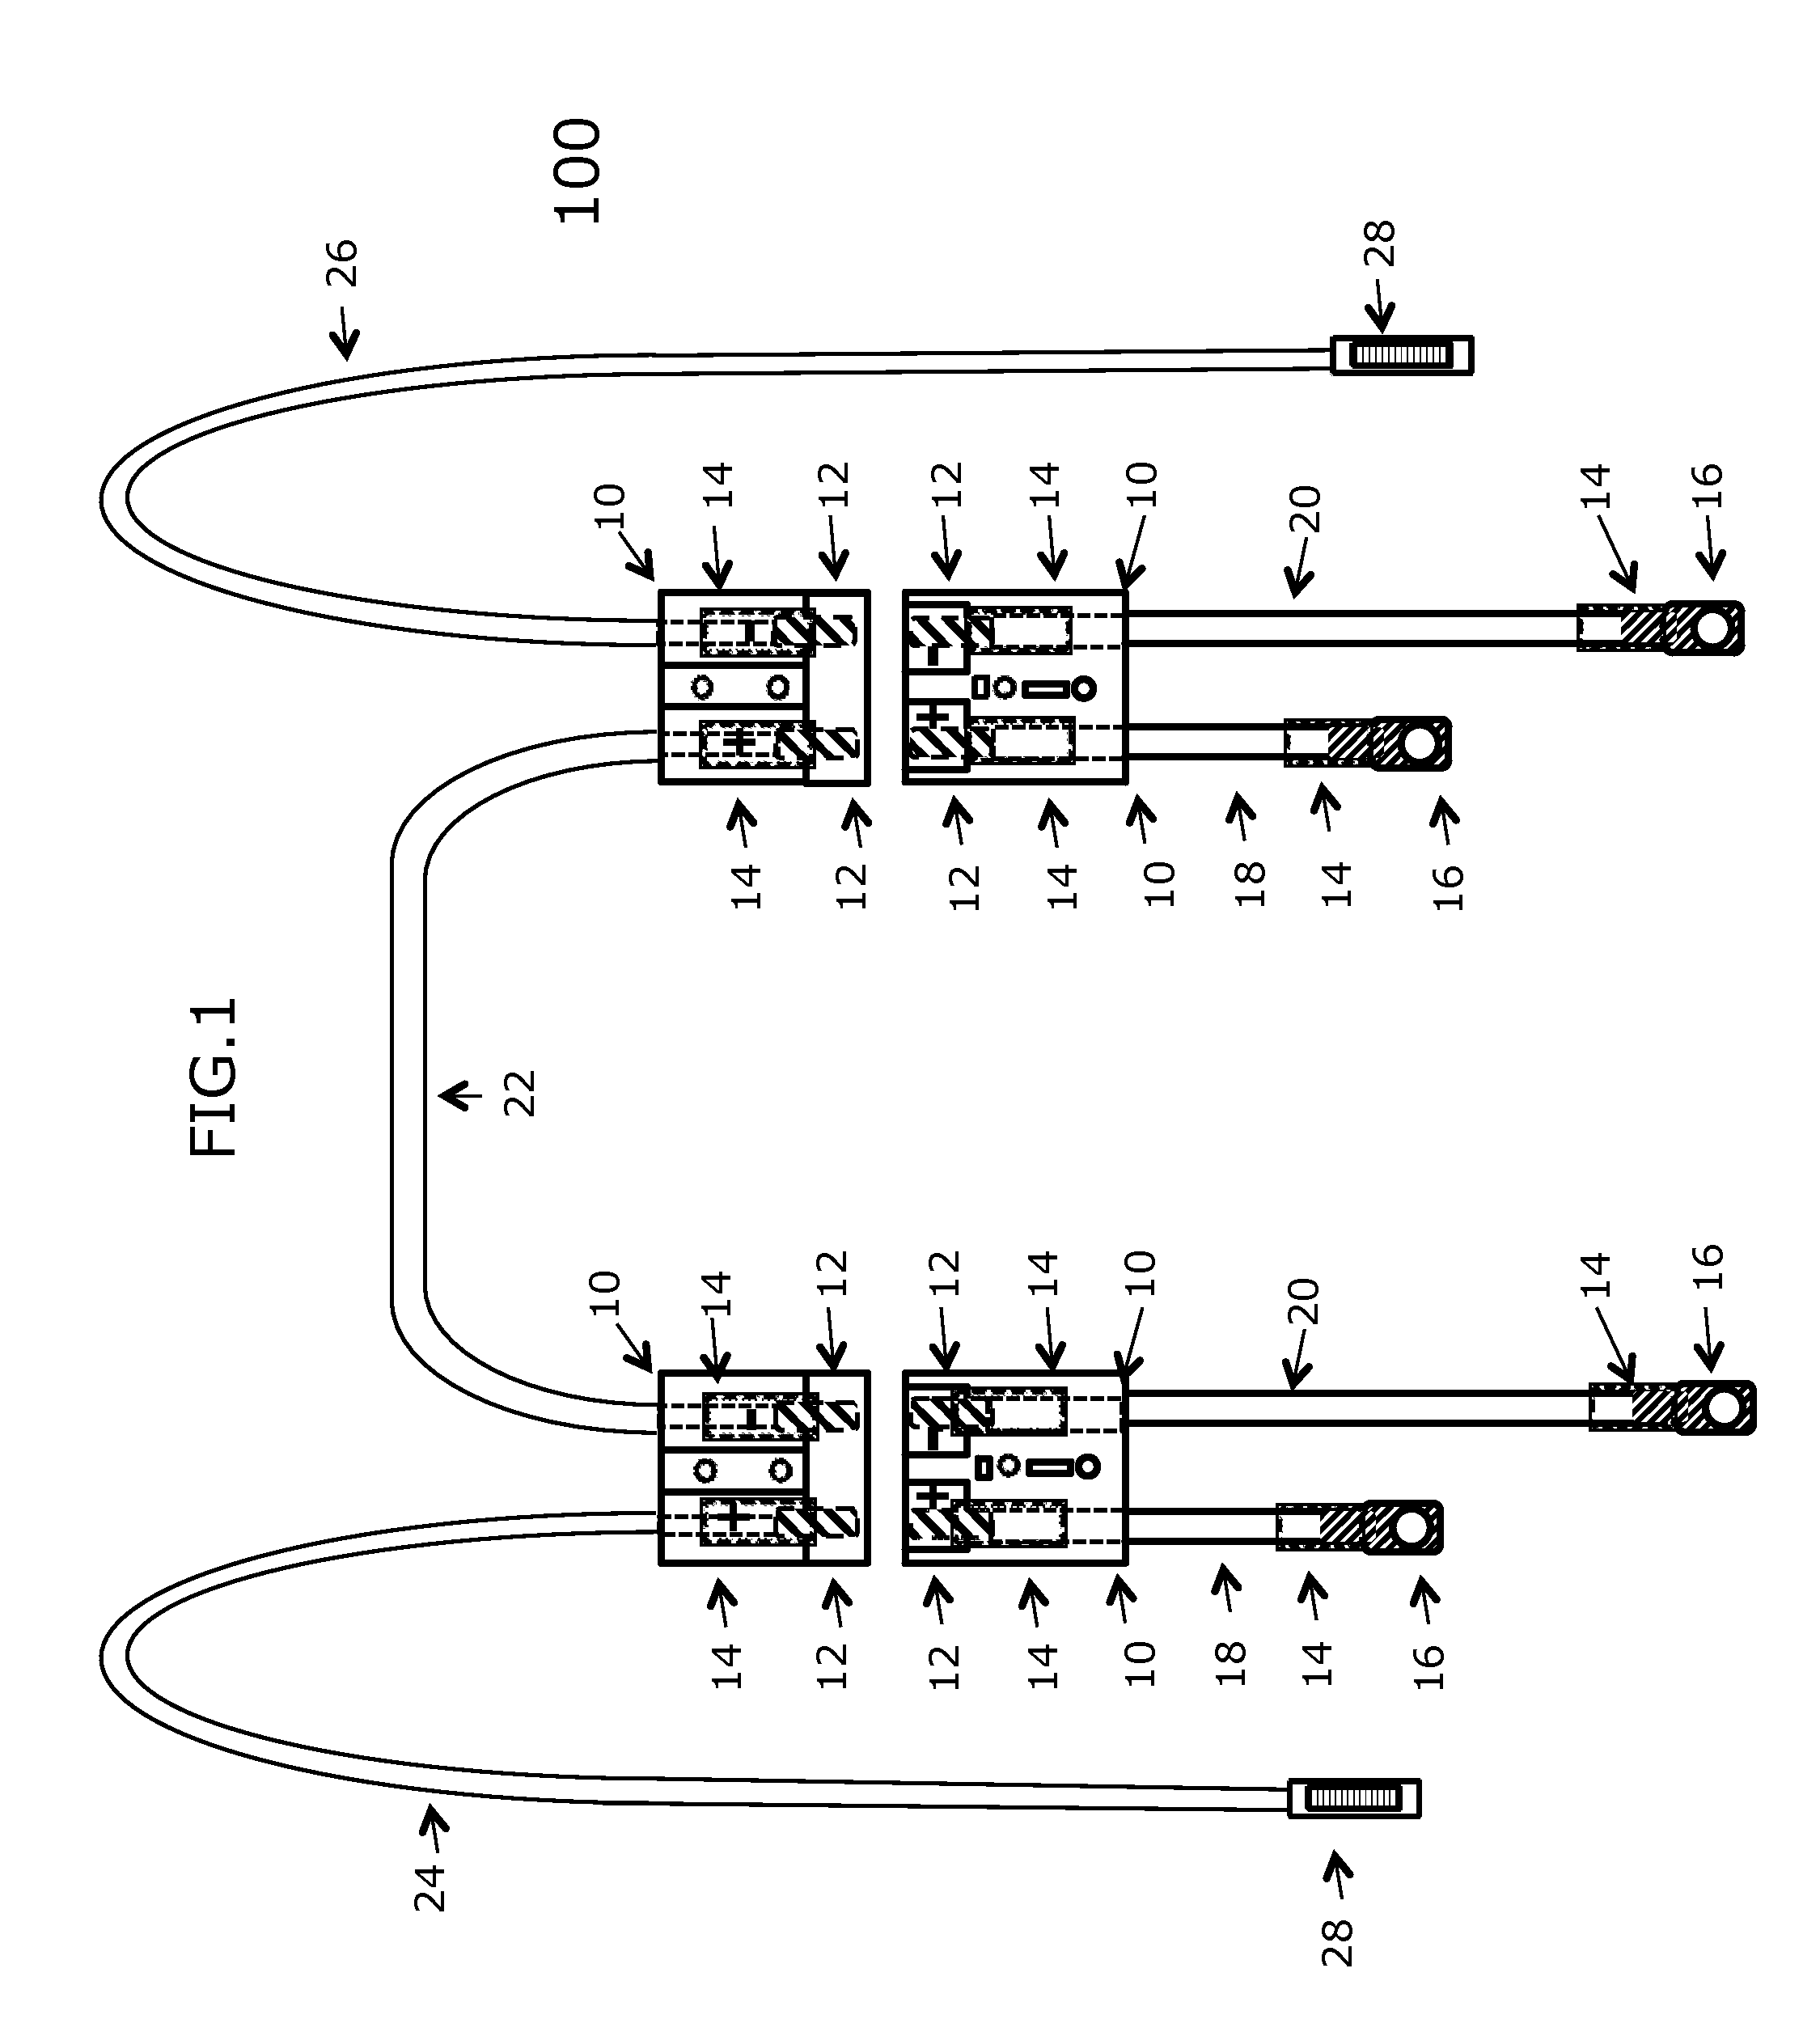 Multi-battery and multi-device connection system